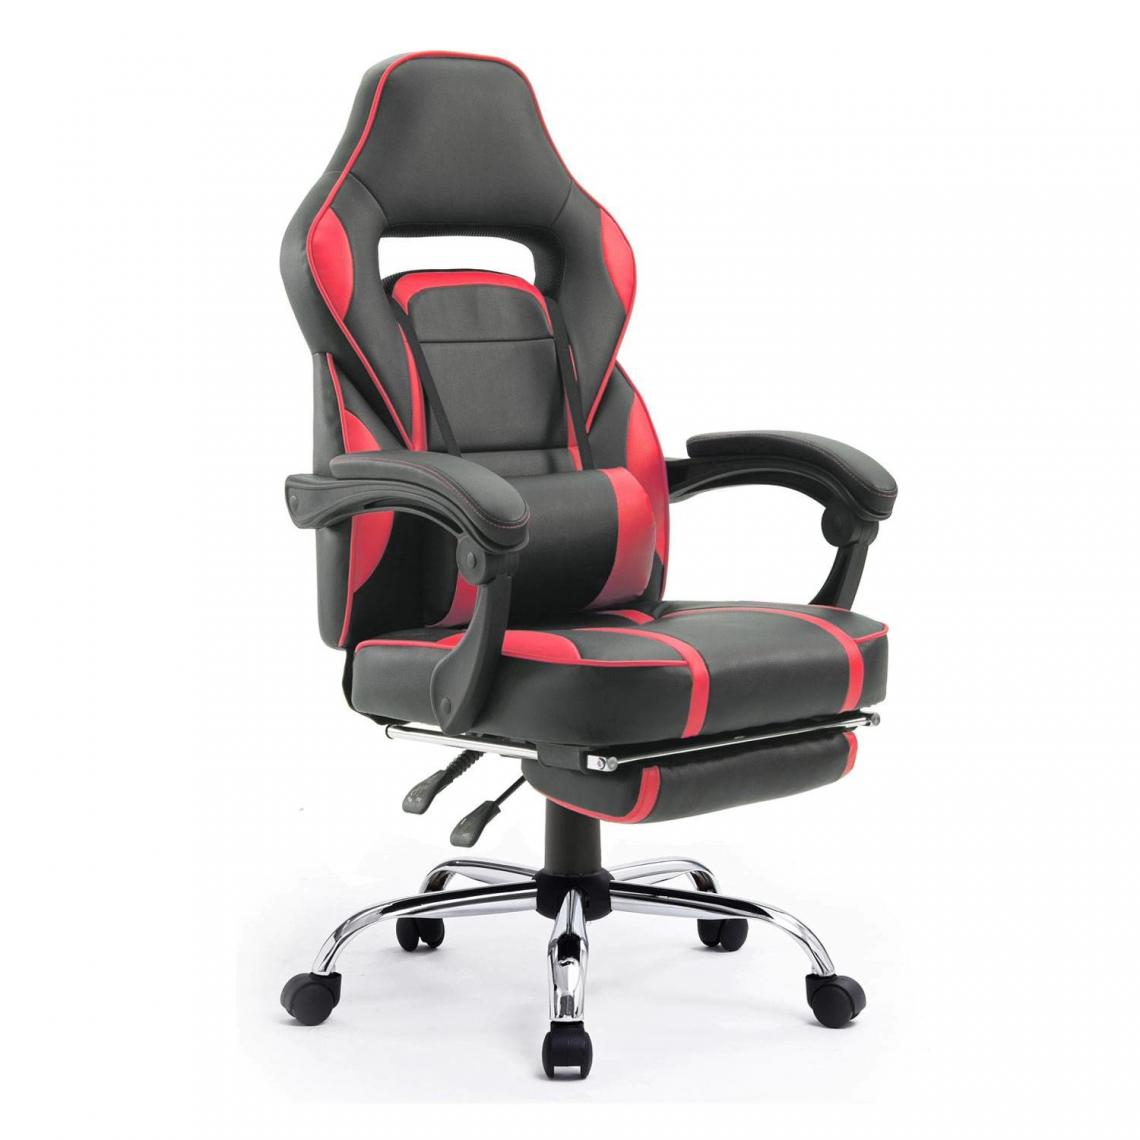 Beneffito - GHOST - Fauteuil de bureau GAMER inclinable avec repose-pieds - Rouge - Chaise gamer